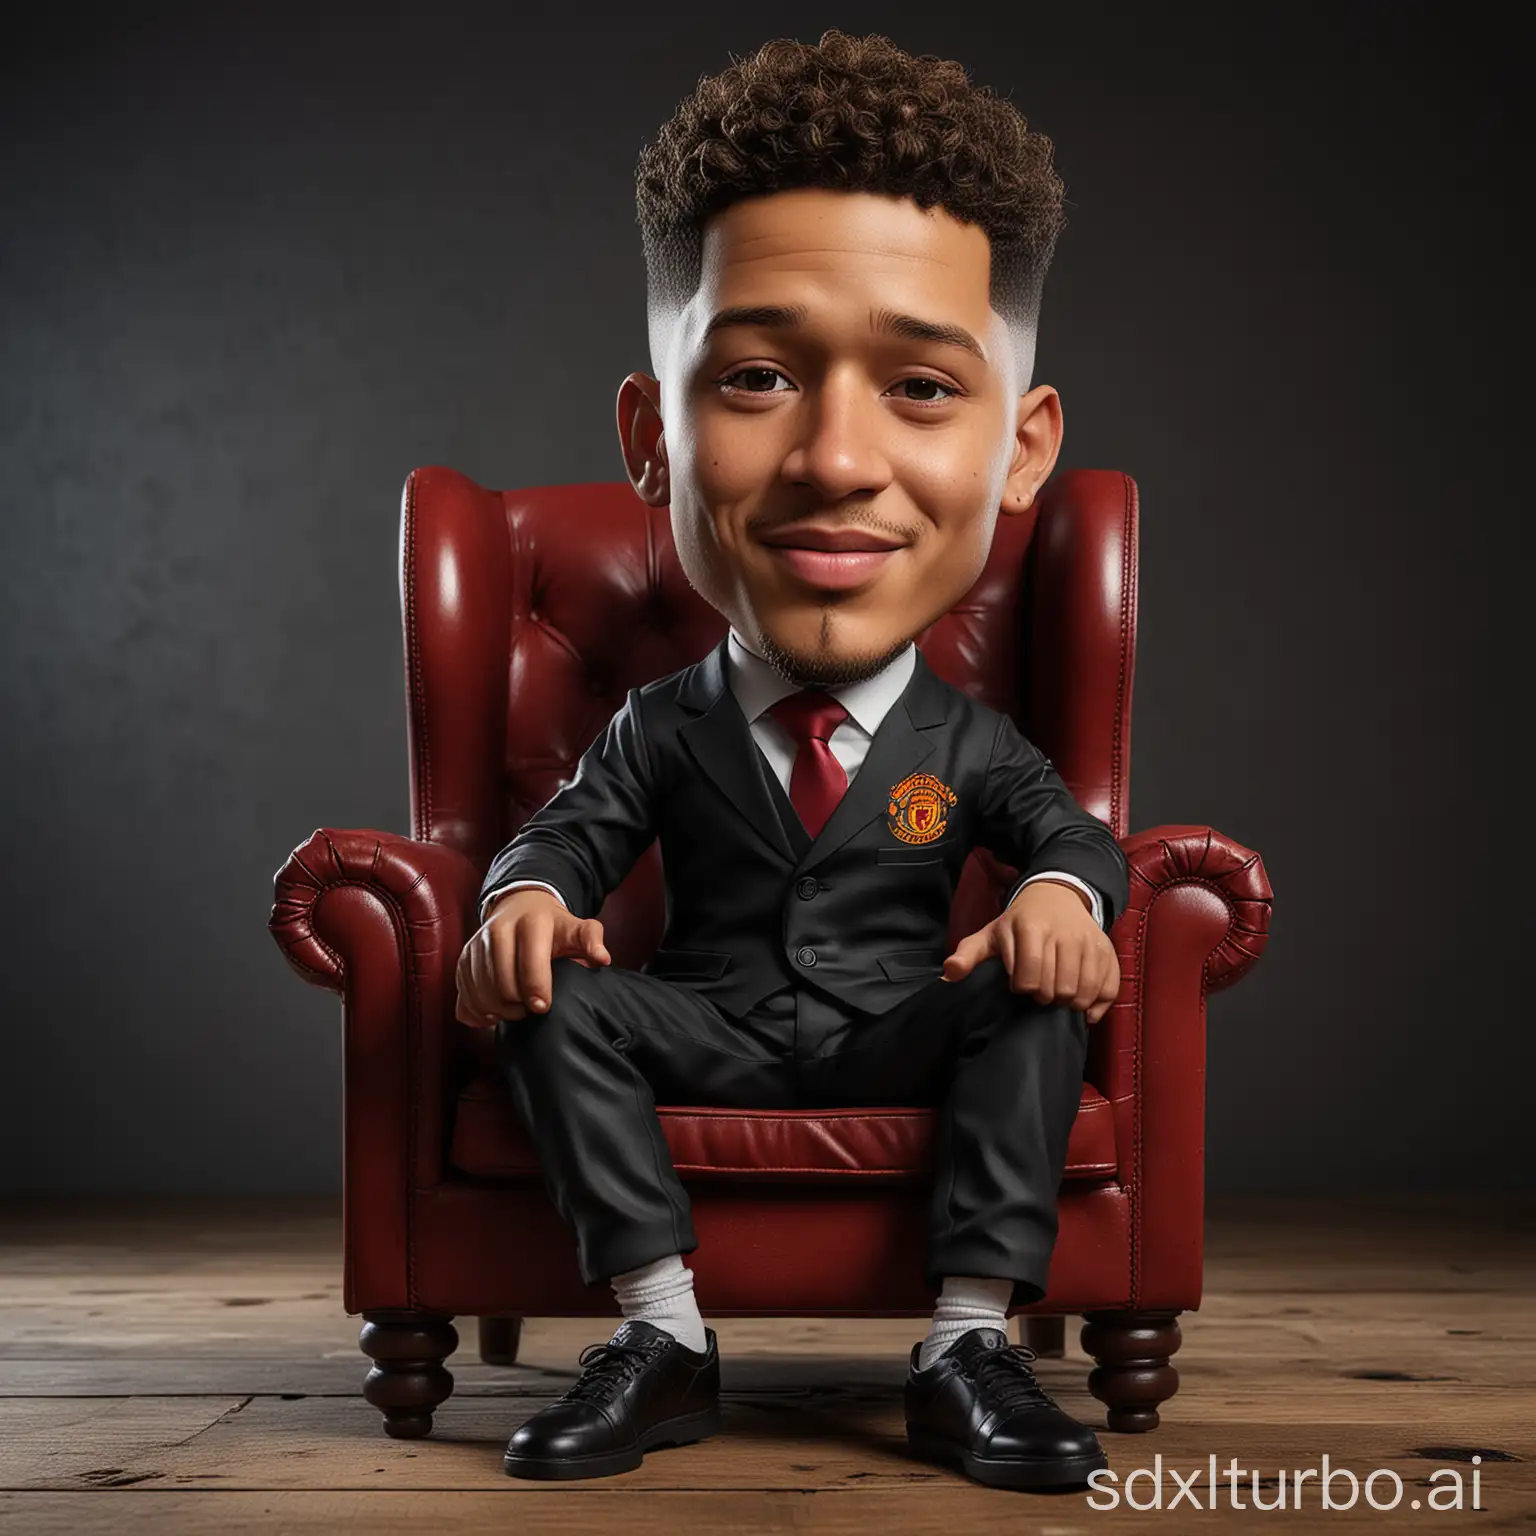 Relaxed-Jadon-Sancho-Surrounded-by-Football-Trophies-in-Stylish-Manchester-United-Attire